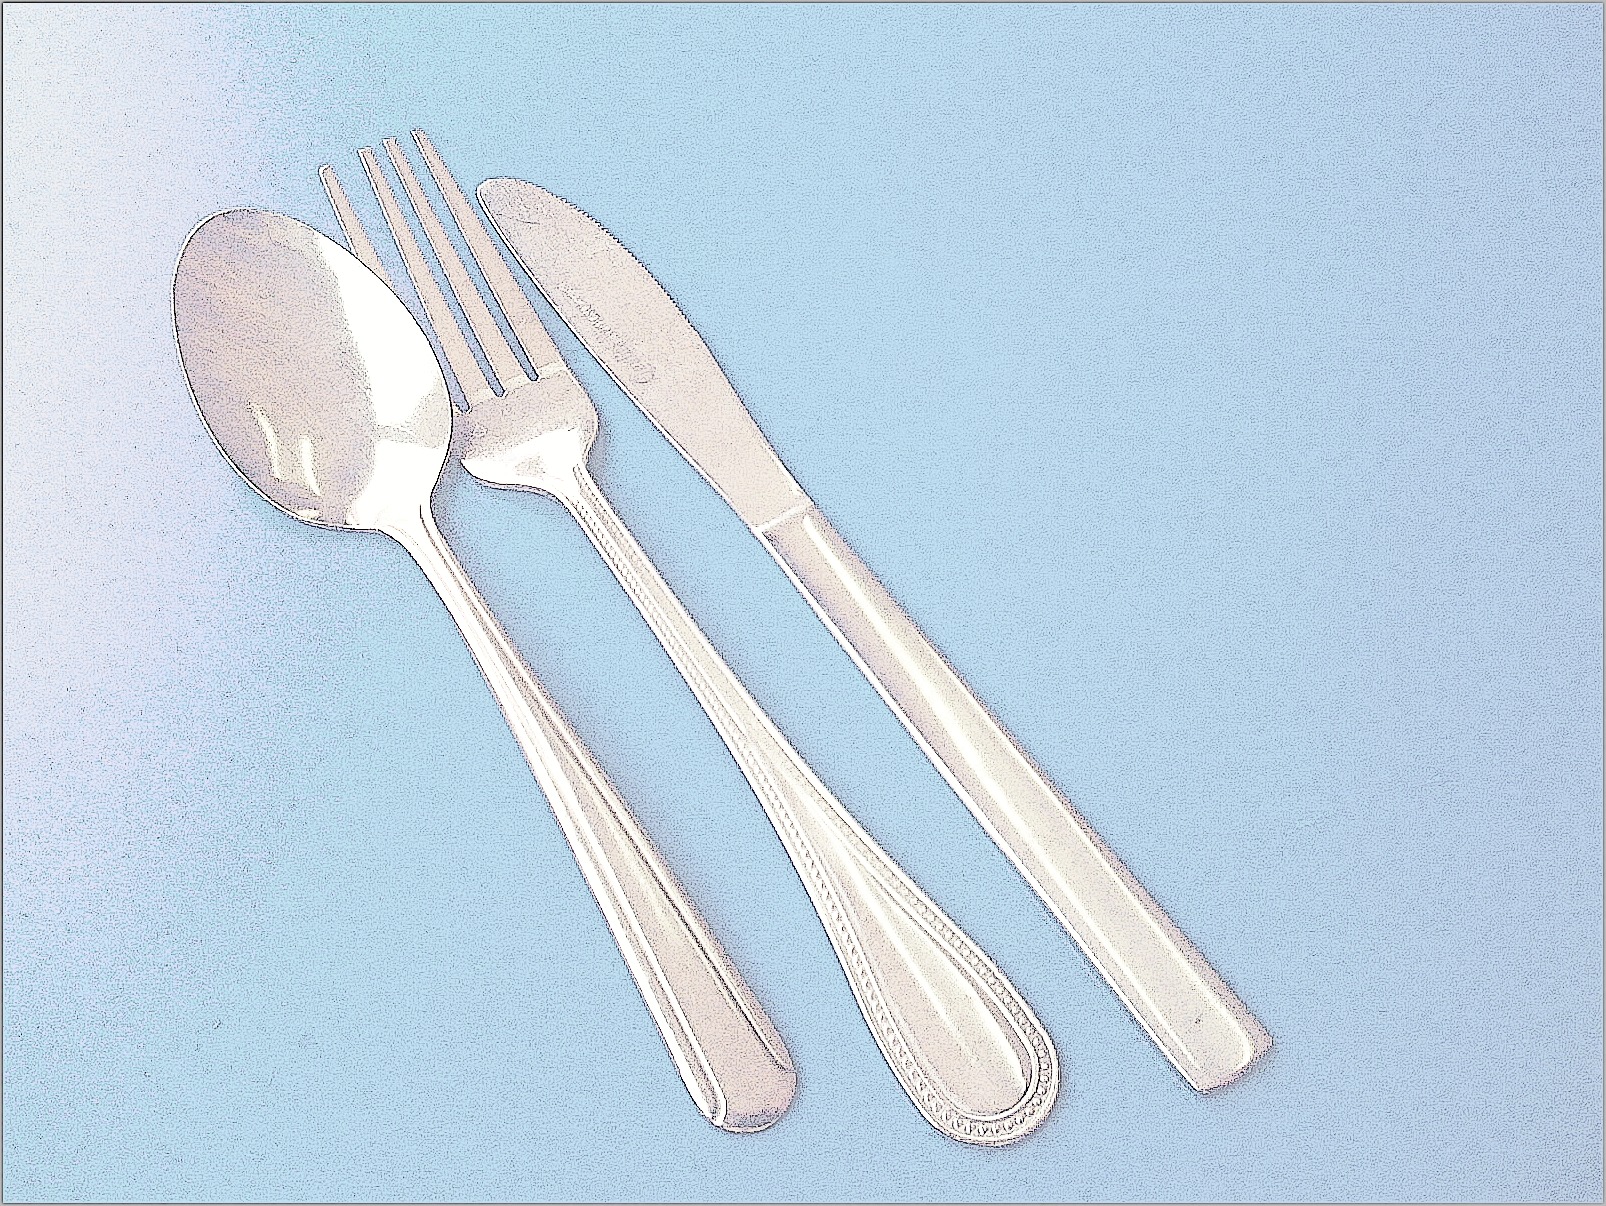 Knife, Fork, Spoon at the Diner march 16 2012